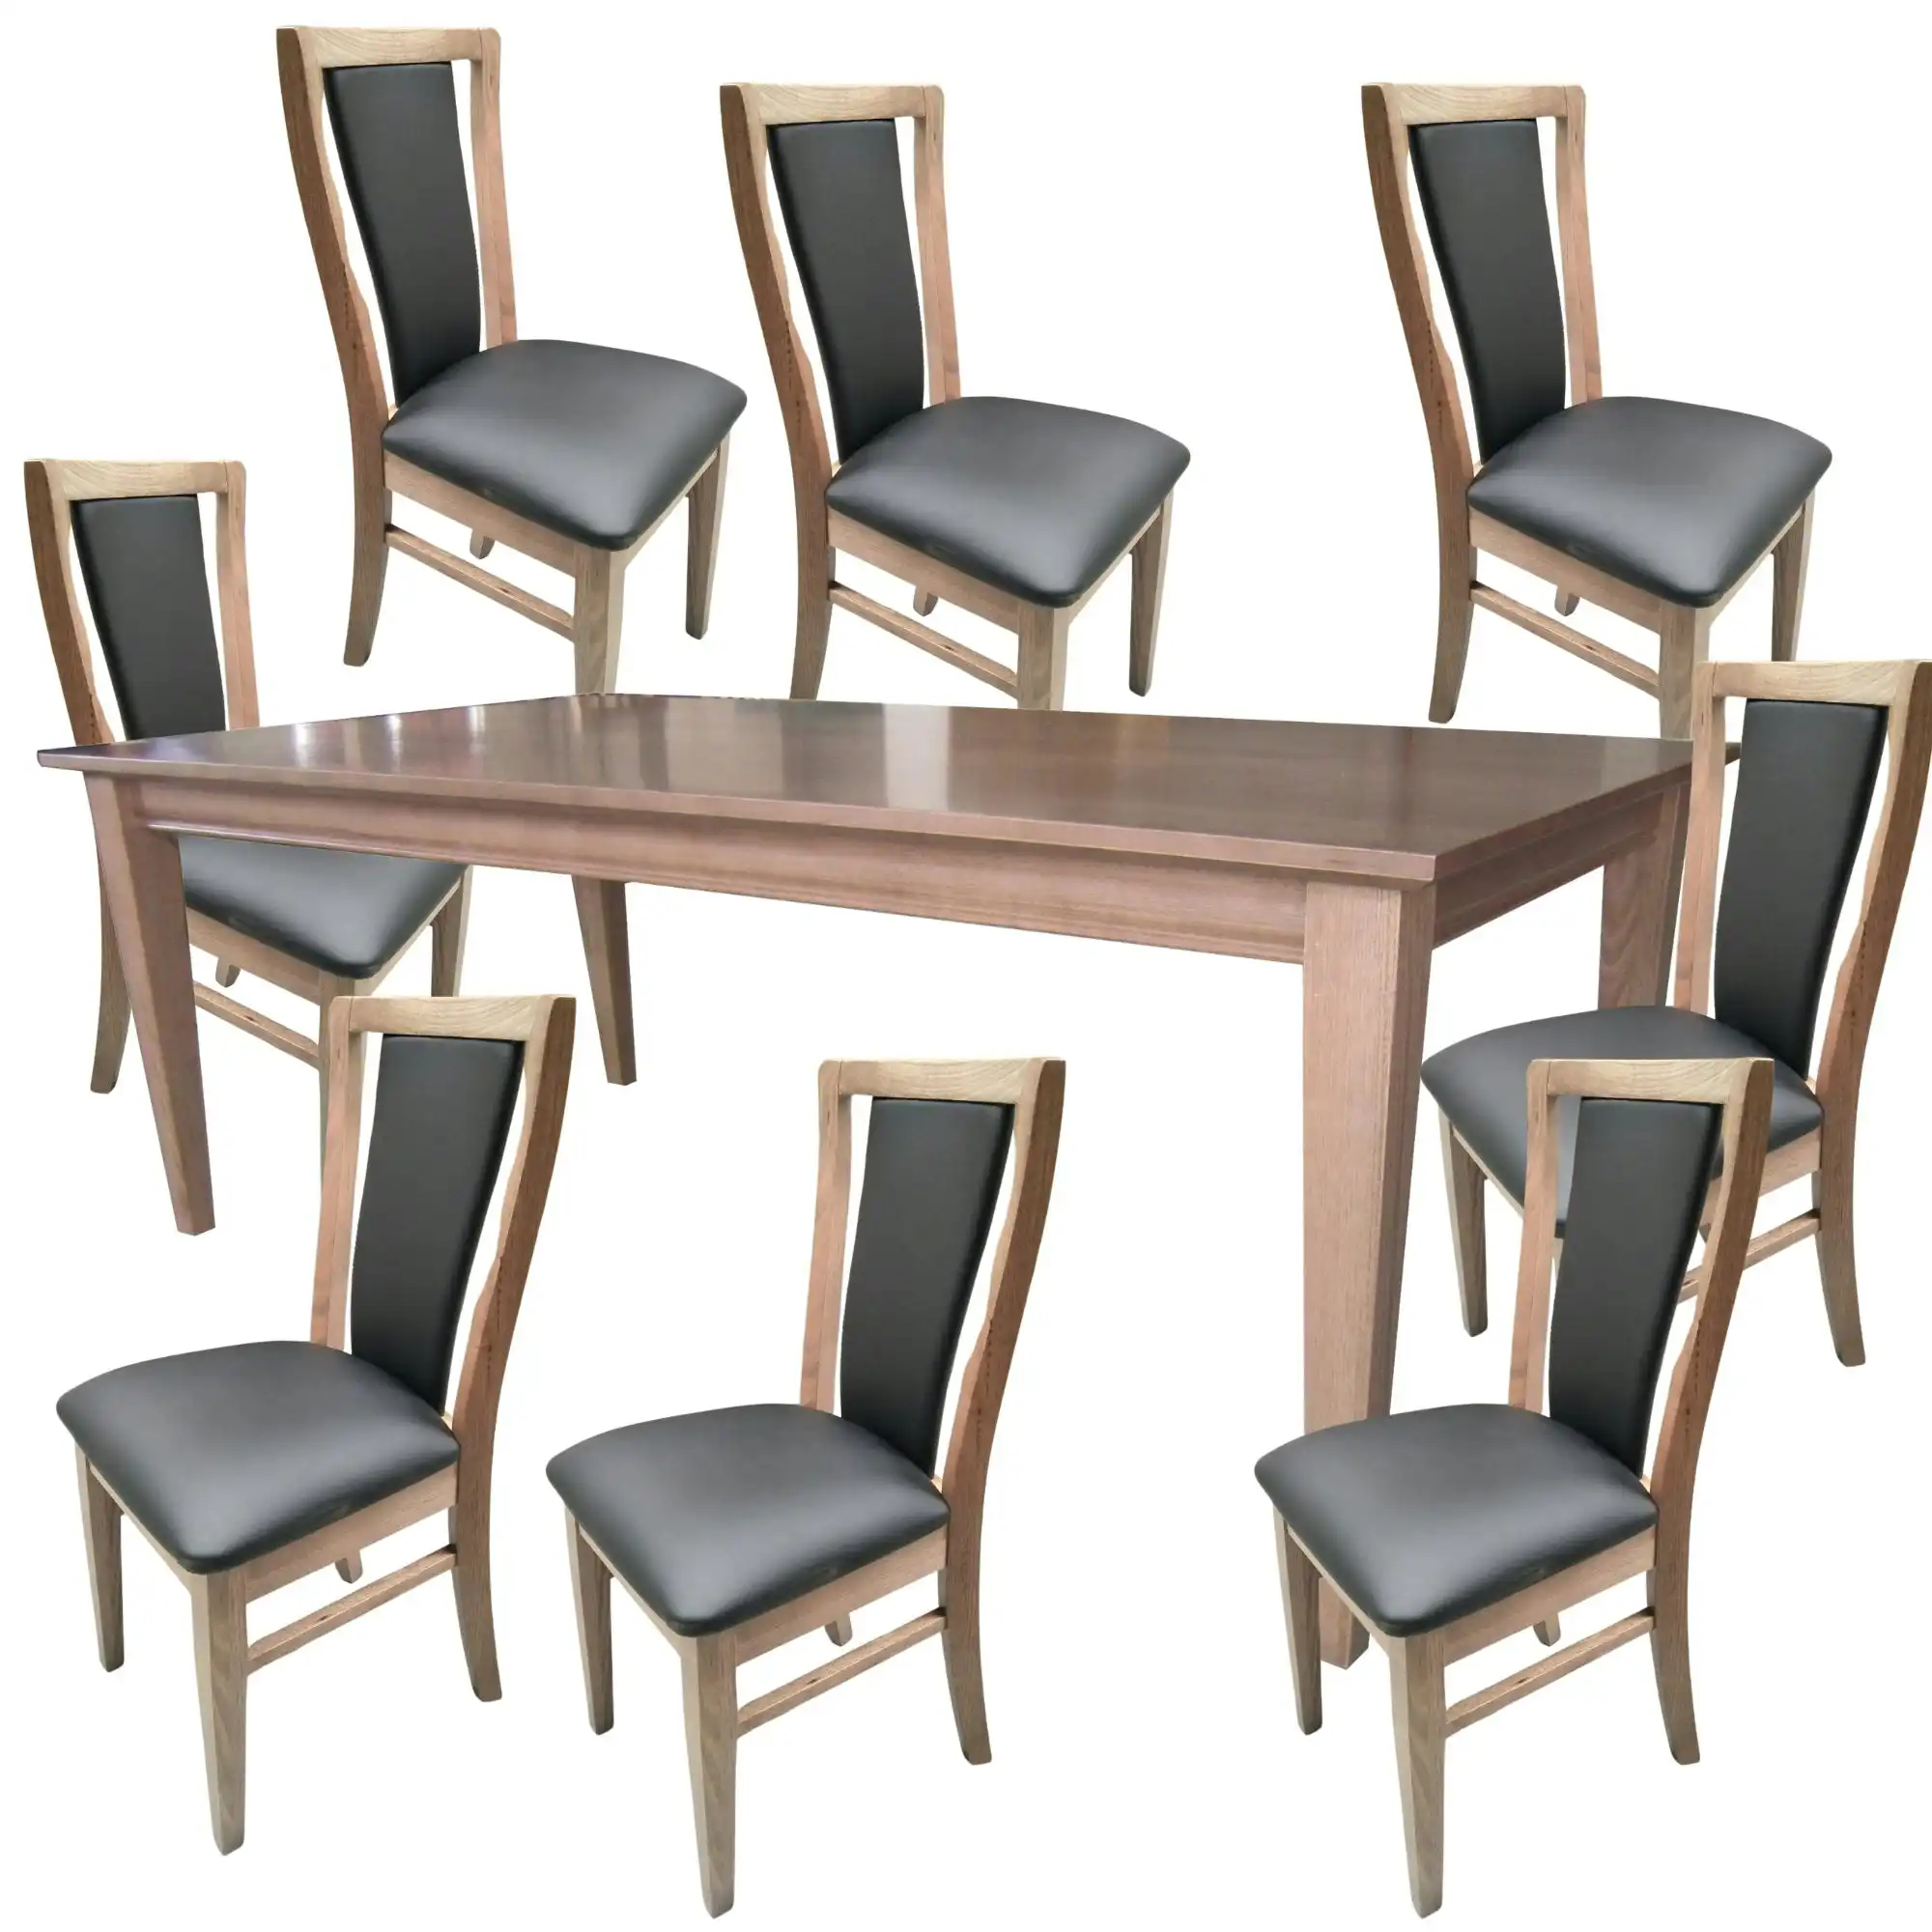 Fairmont 9pc Dining Table PU Padded Back Chair Set